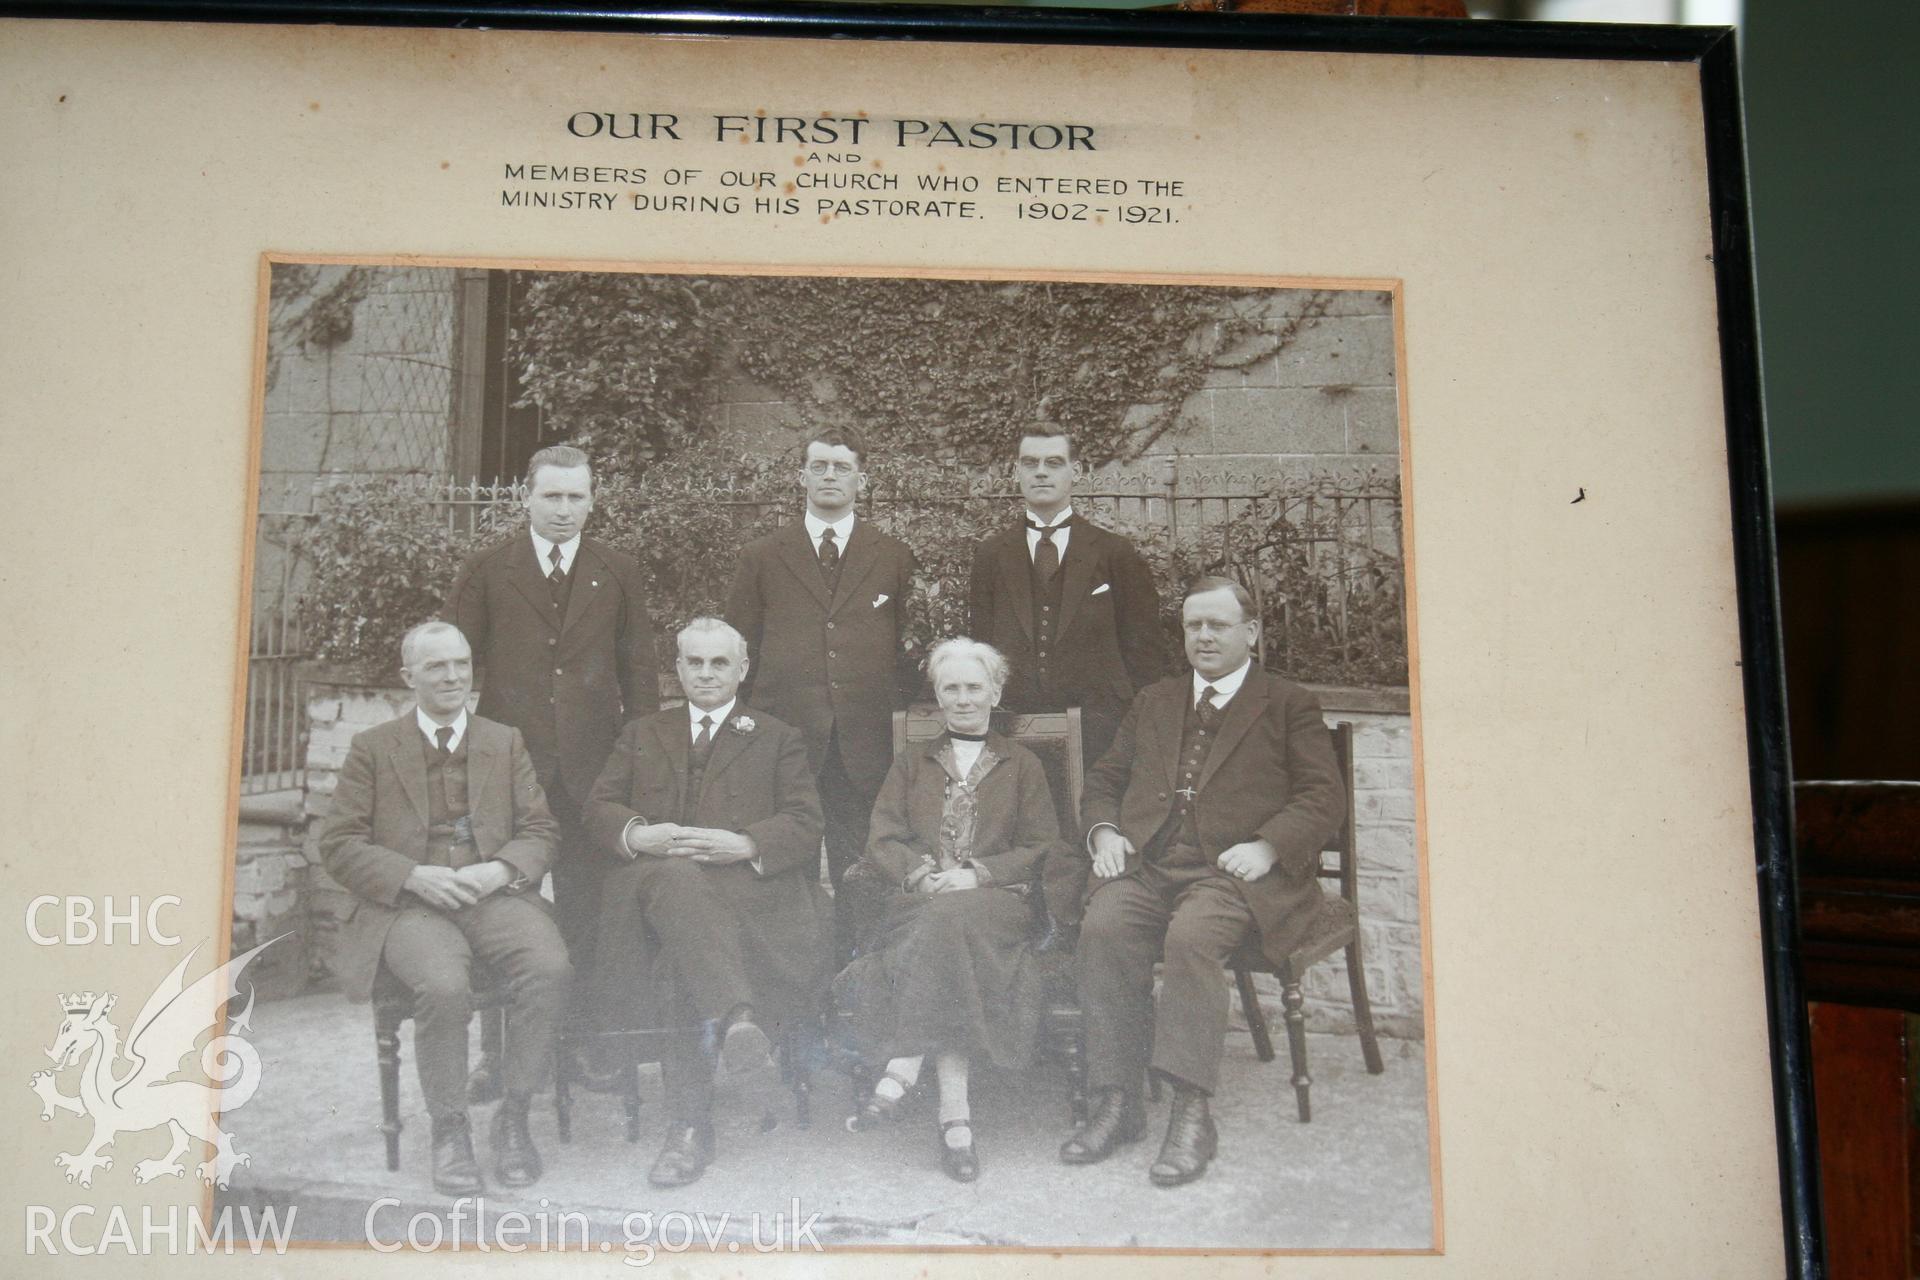 Hanbury Road baptist chapel, Bargoed, digital colour photograph showing Photograph of the Rev. Harri Edwards and members of Hanbury Road Chapel who entered the ministry during his pastorate, received in the course of Emergency Recording case ref no RCS2/1/2247.